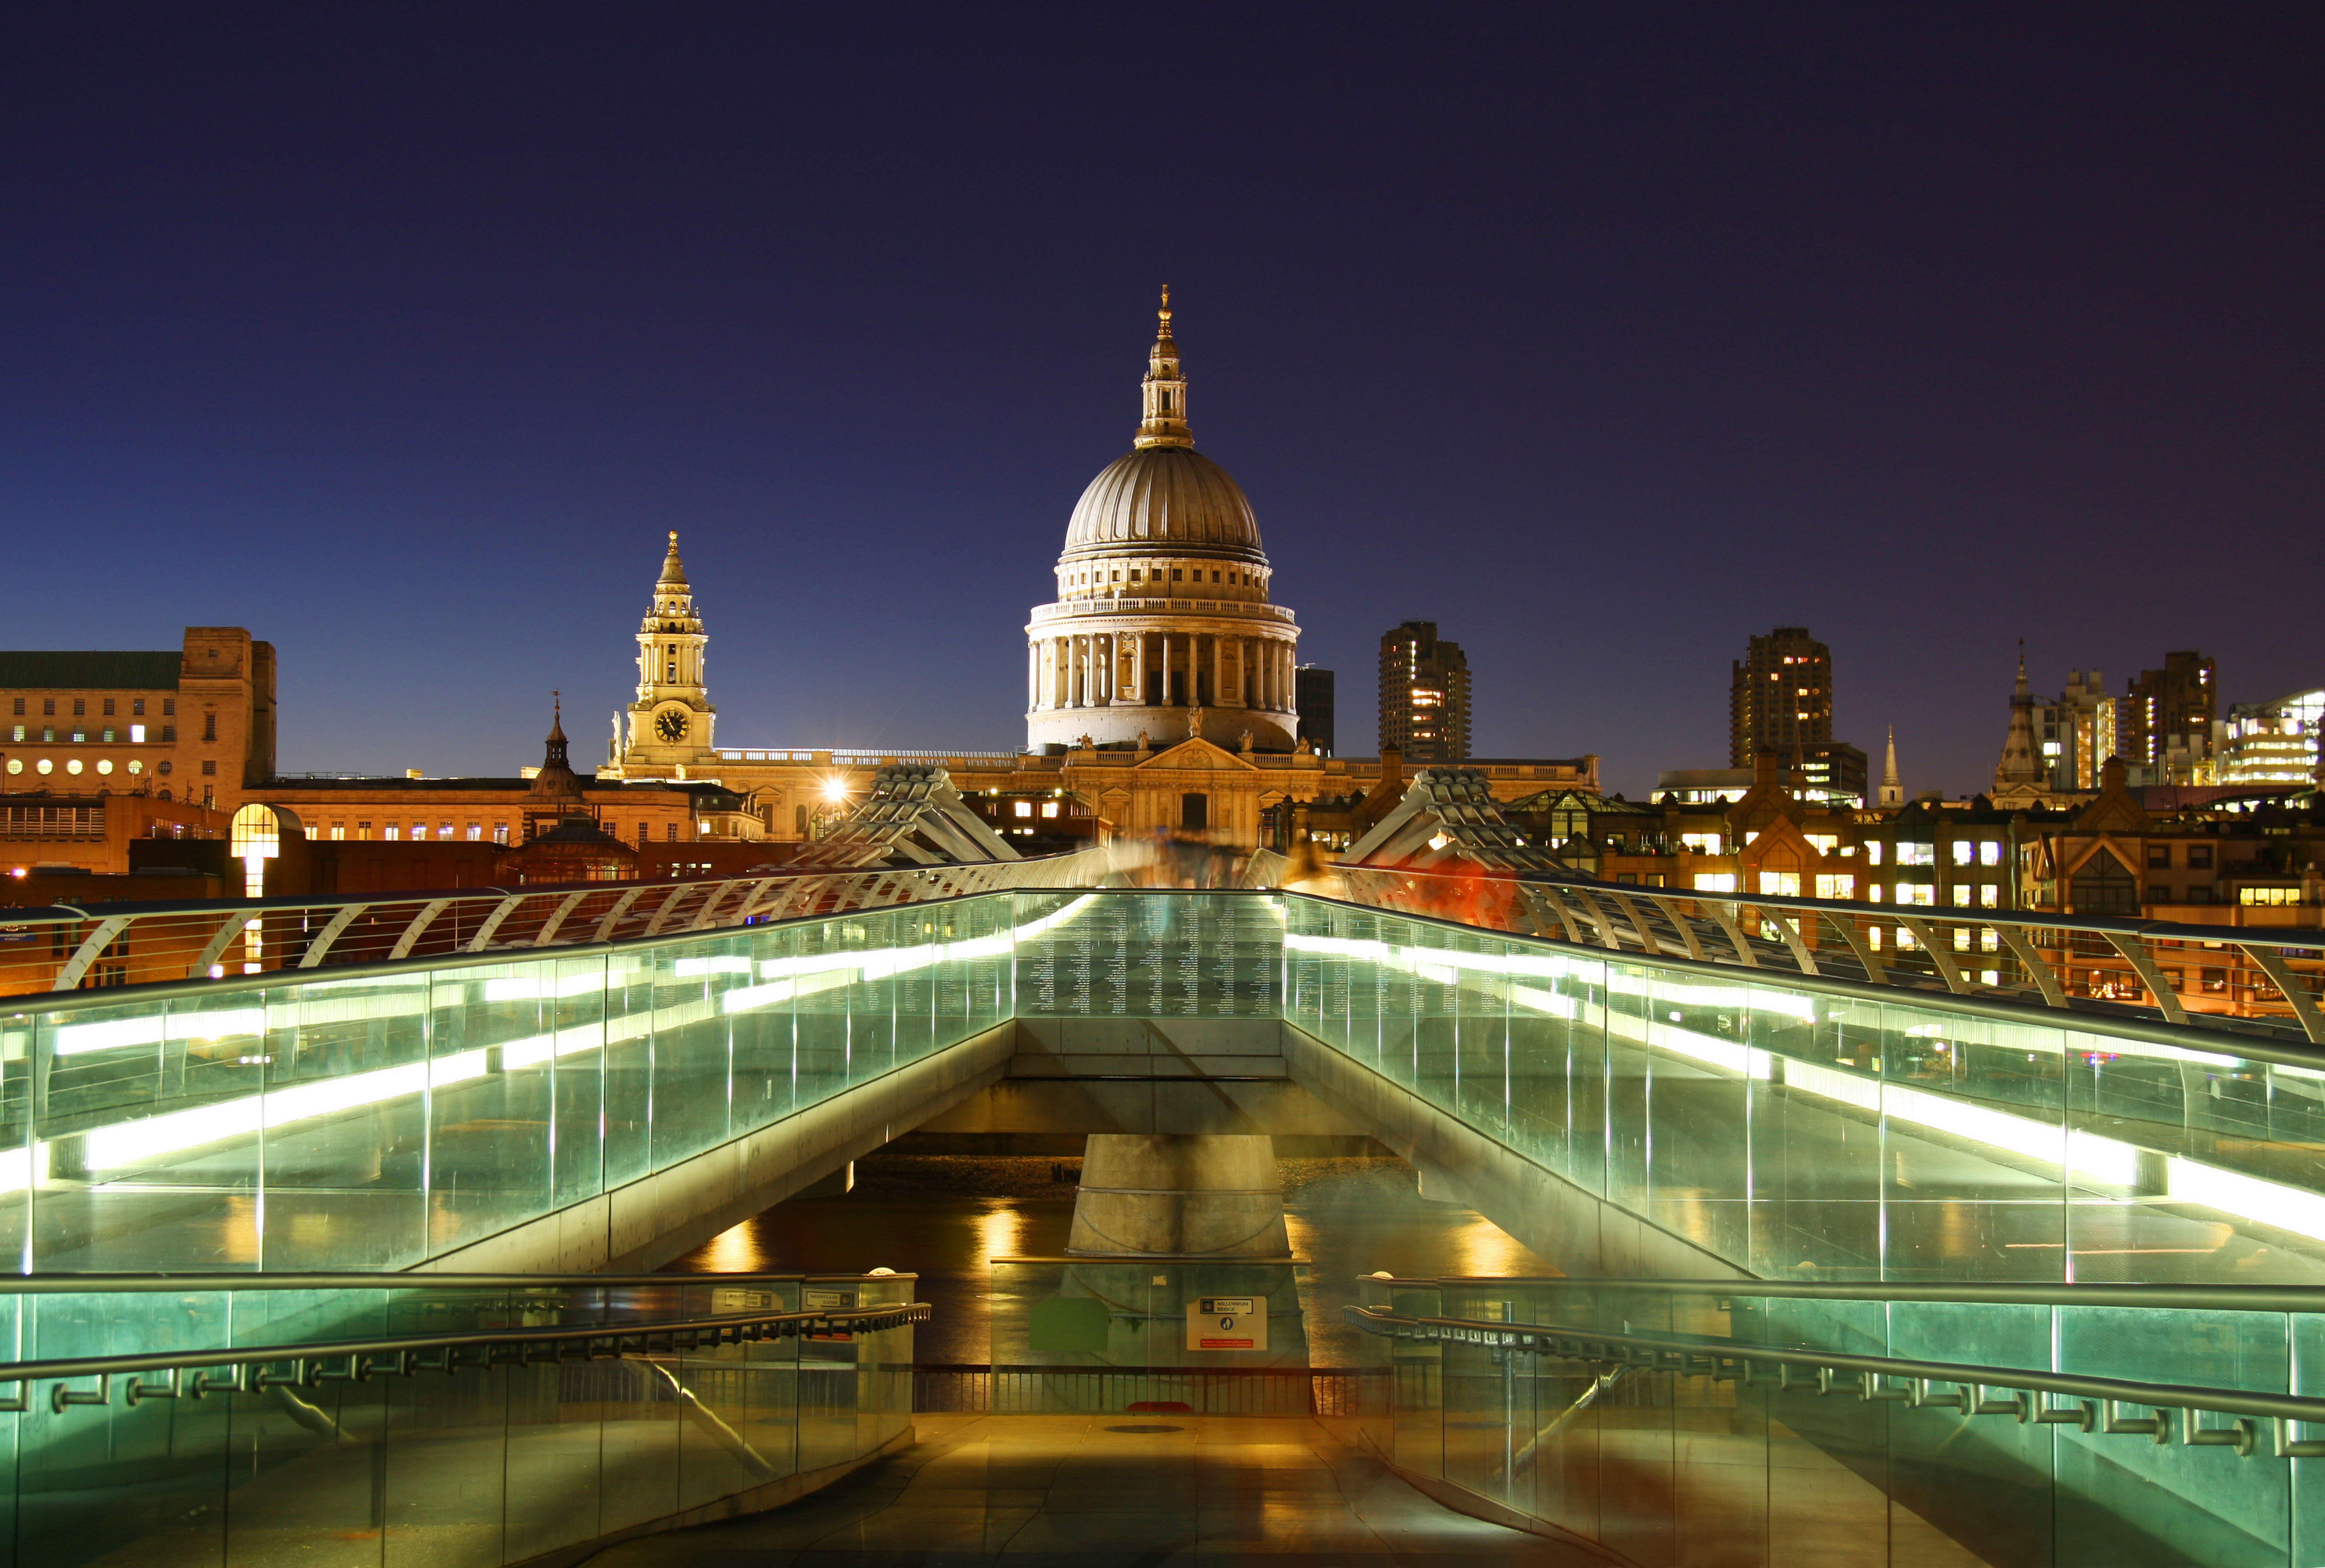 Free HD religious, st paul's cathedral, building, cathedral, light, london, millennium bridge, monument, night, united kingdom, cathedrals